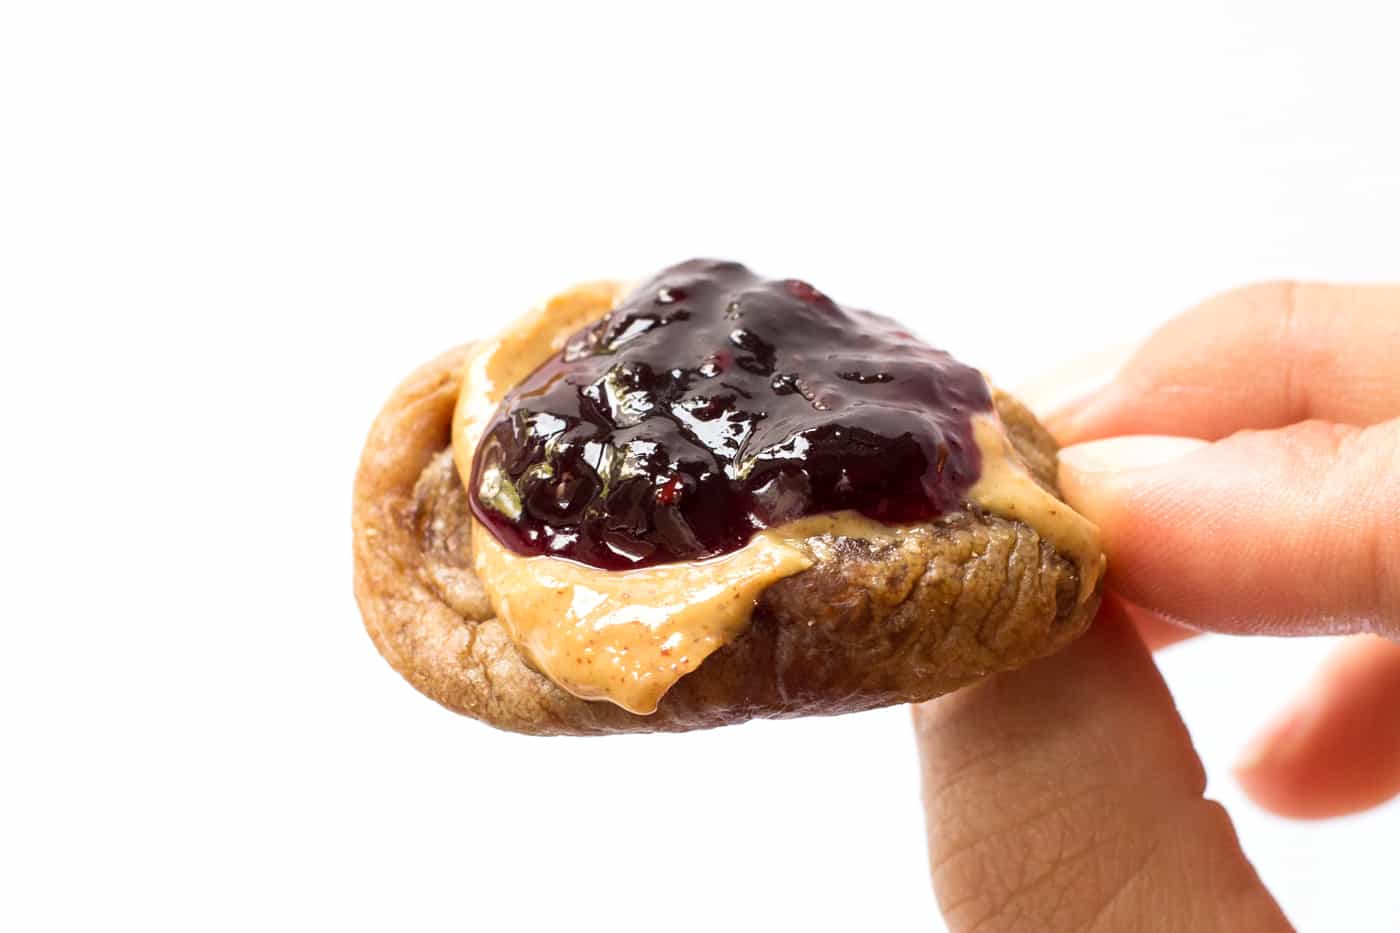 The BEST snack in the entire world -- dried turkish fig with creamy peanut butter and jam!